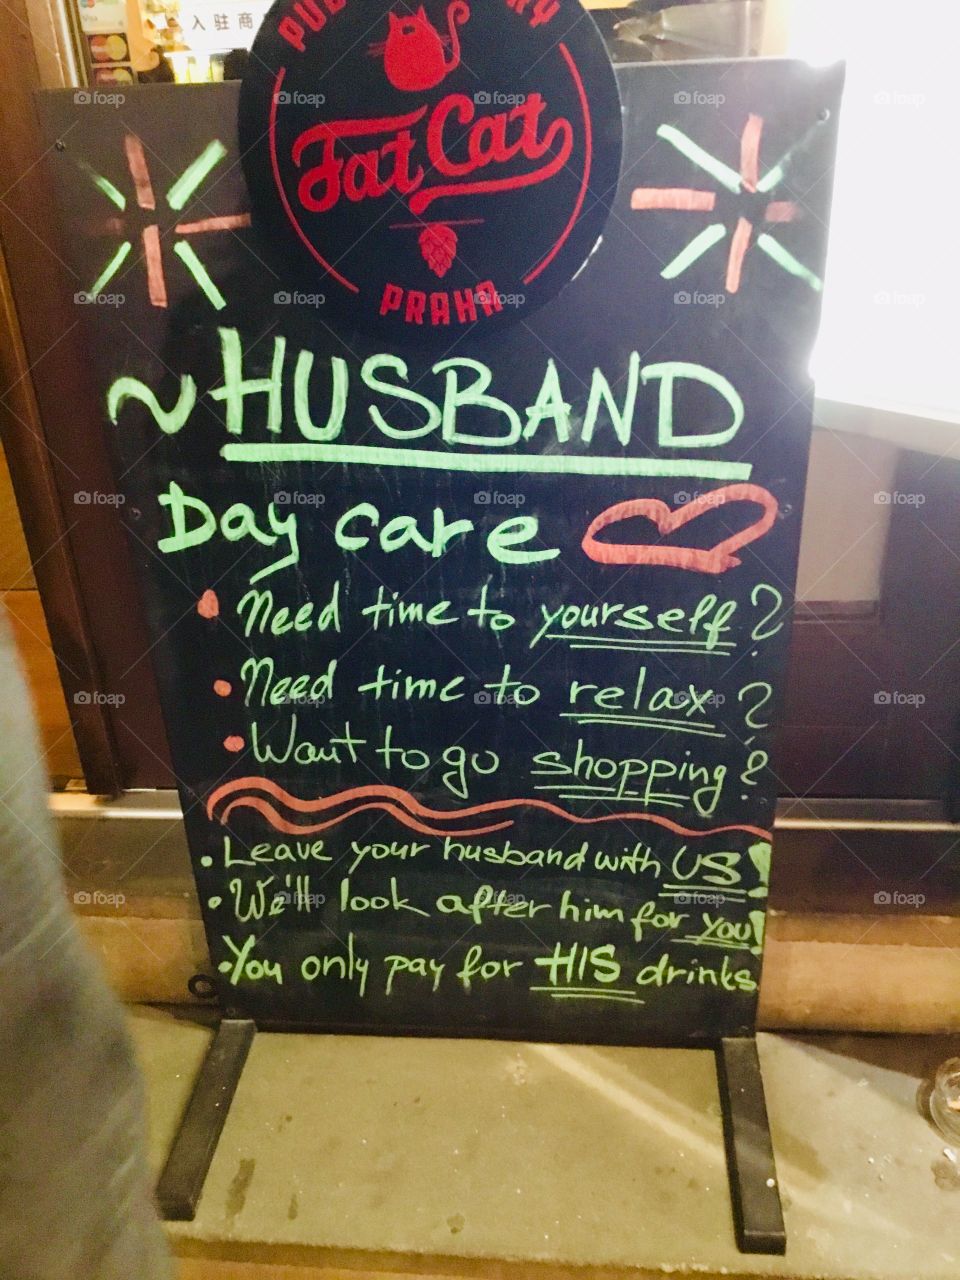 Husband Daycare - All you have to do is pay for their drinks - good deal. While women shop! 